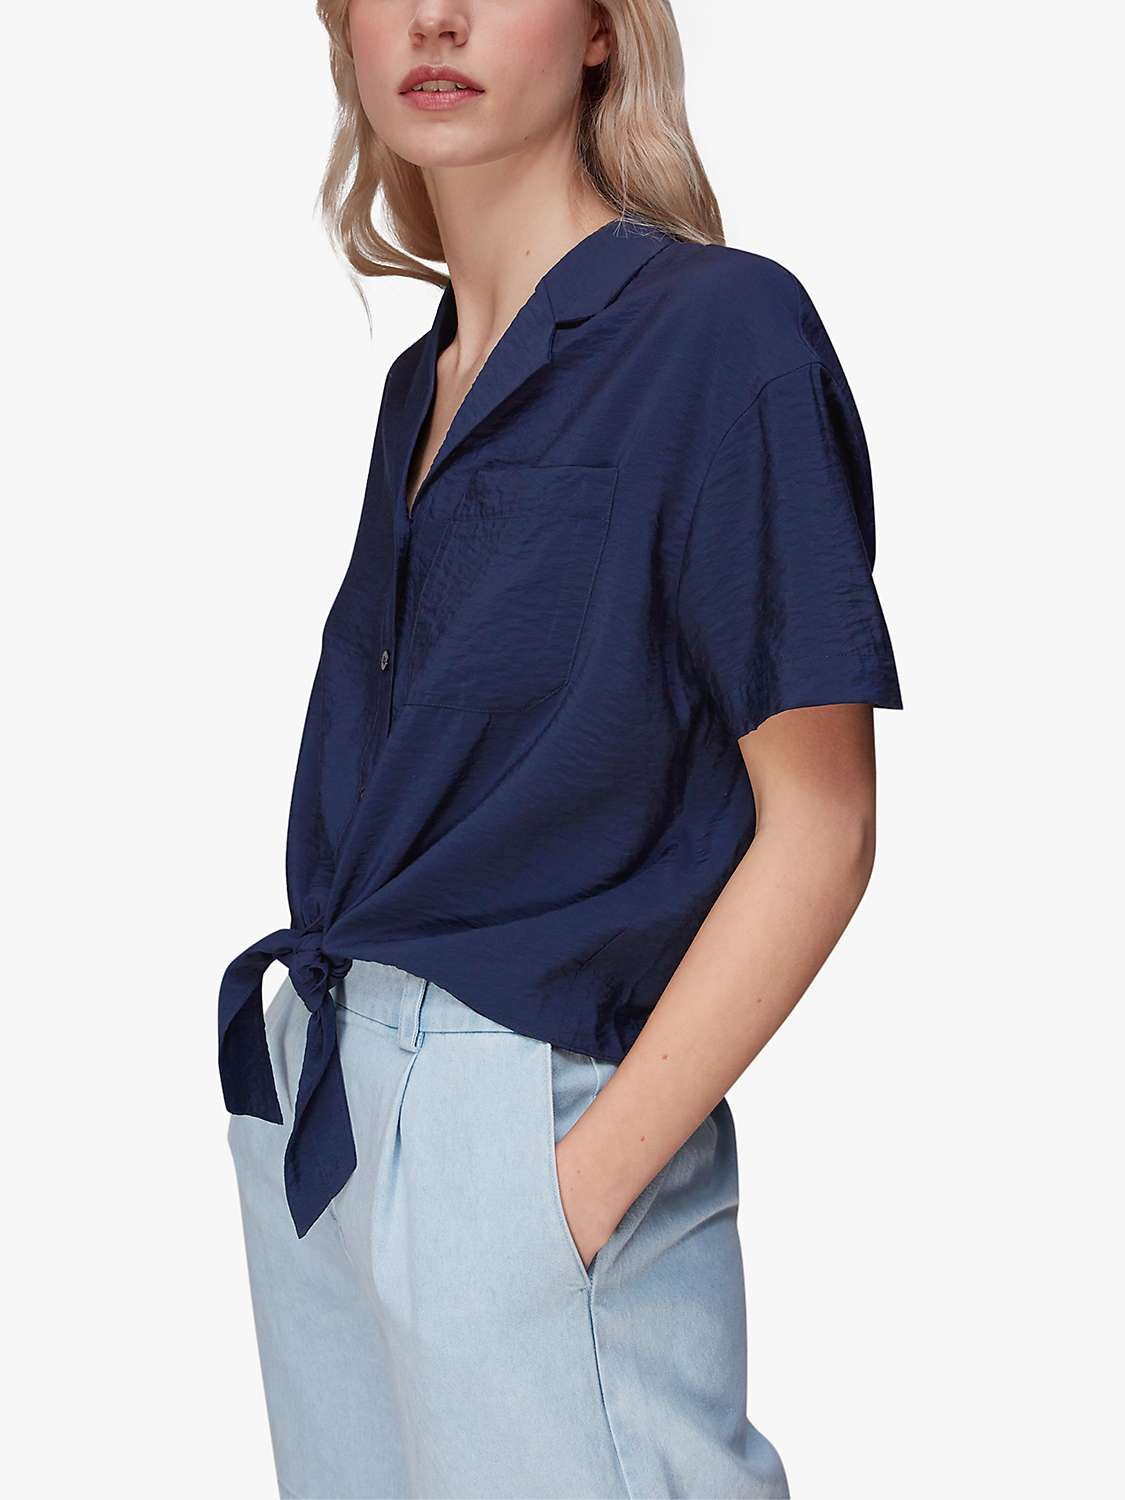 Buy Whistles Nicola Tie Front Blouse, Navy Online at johnlewis.com